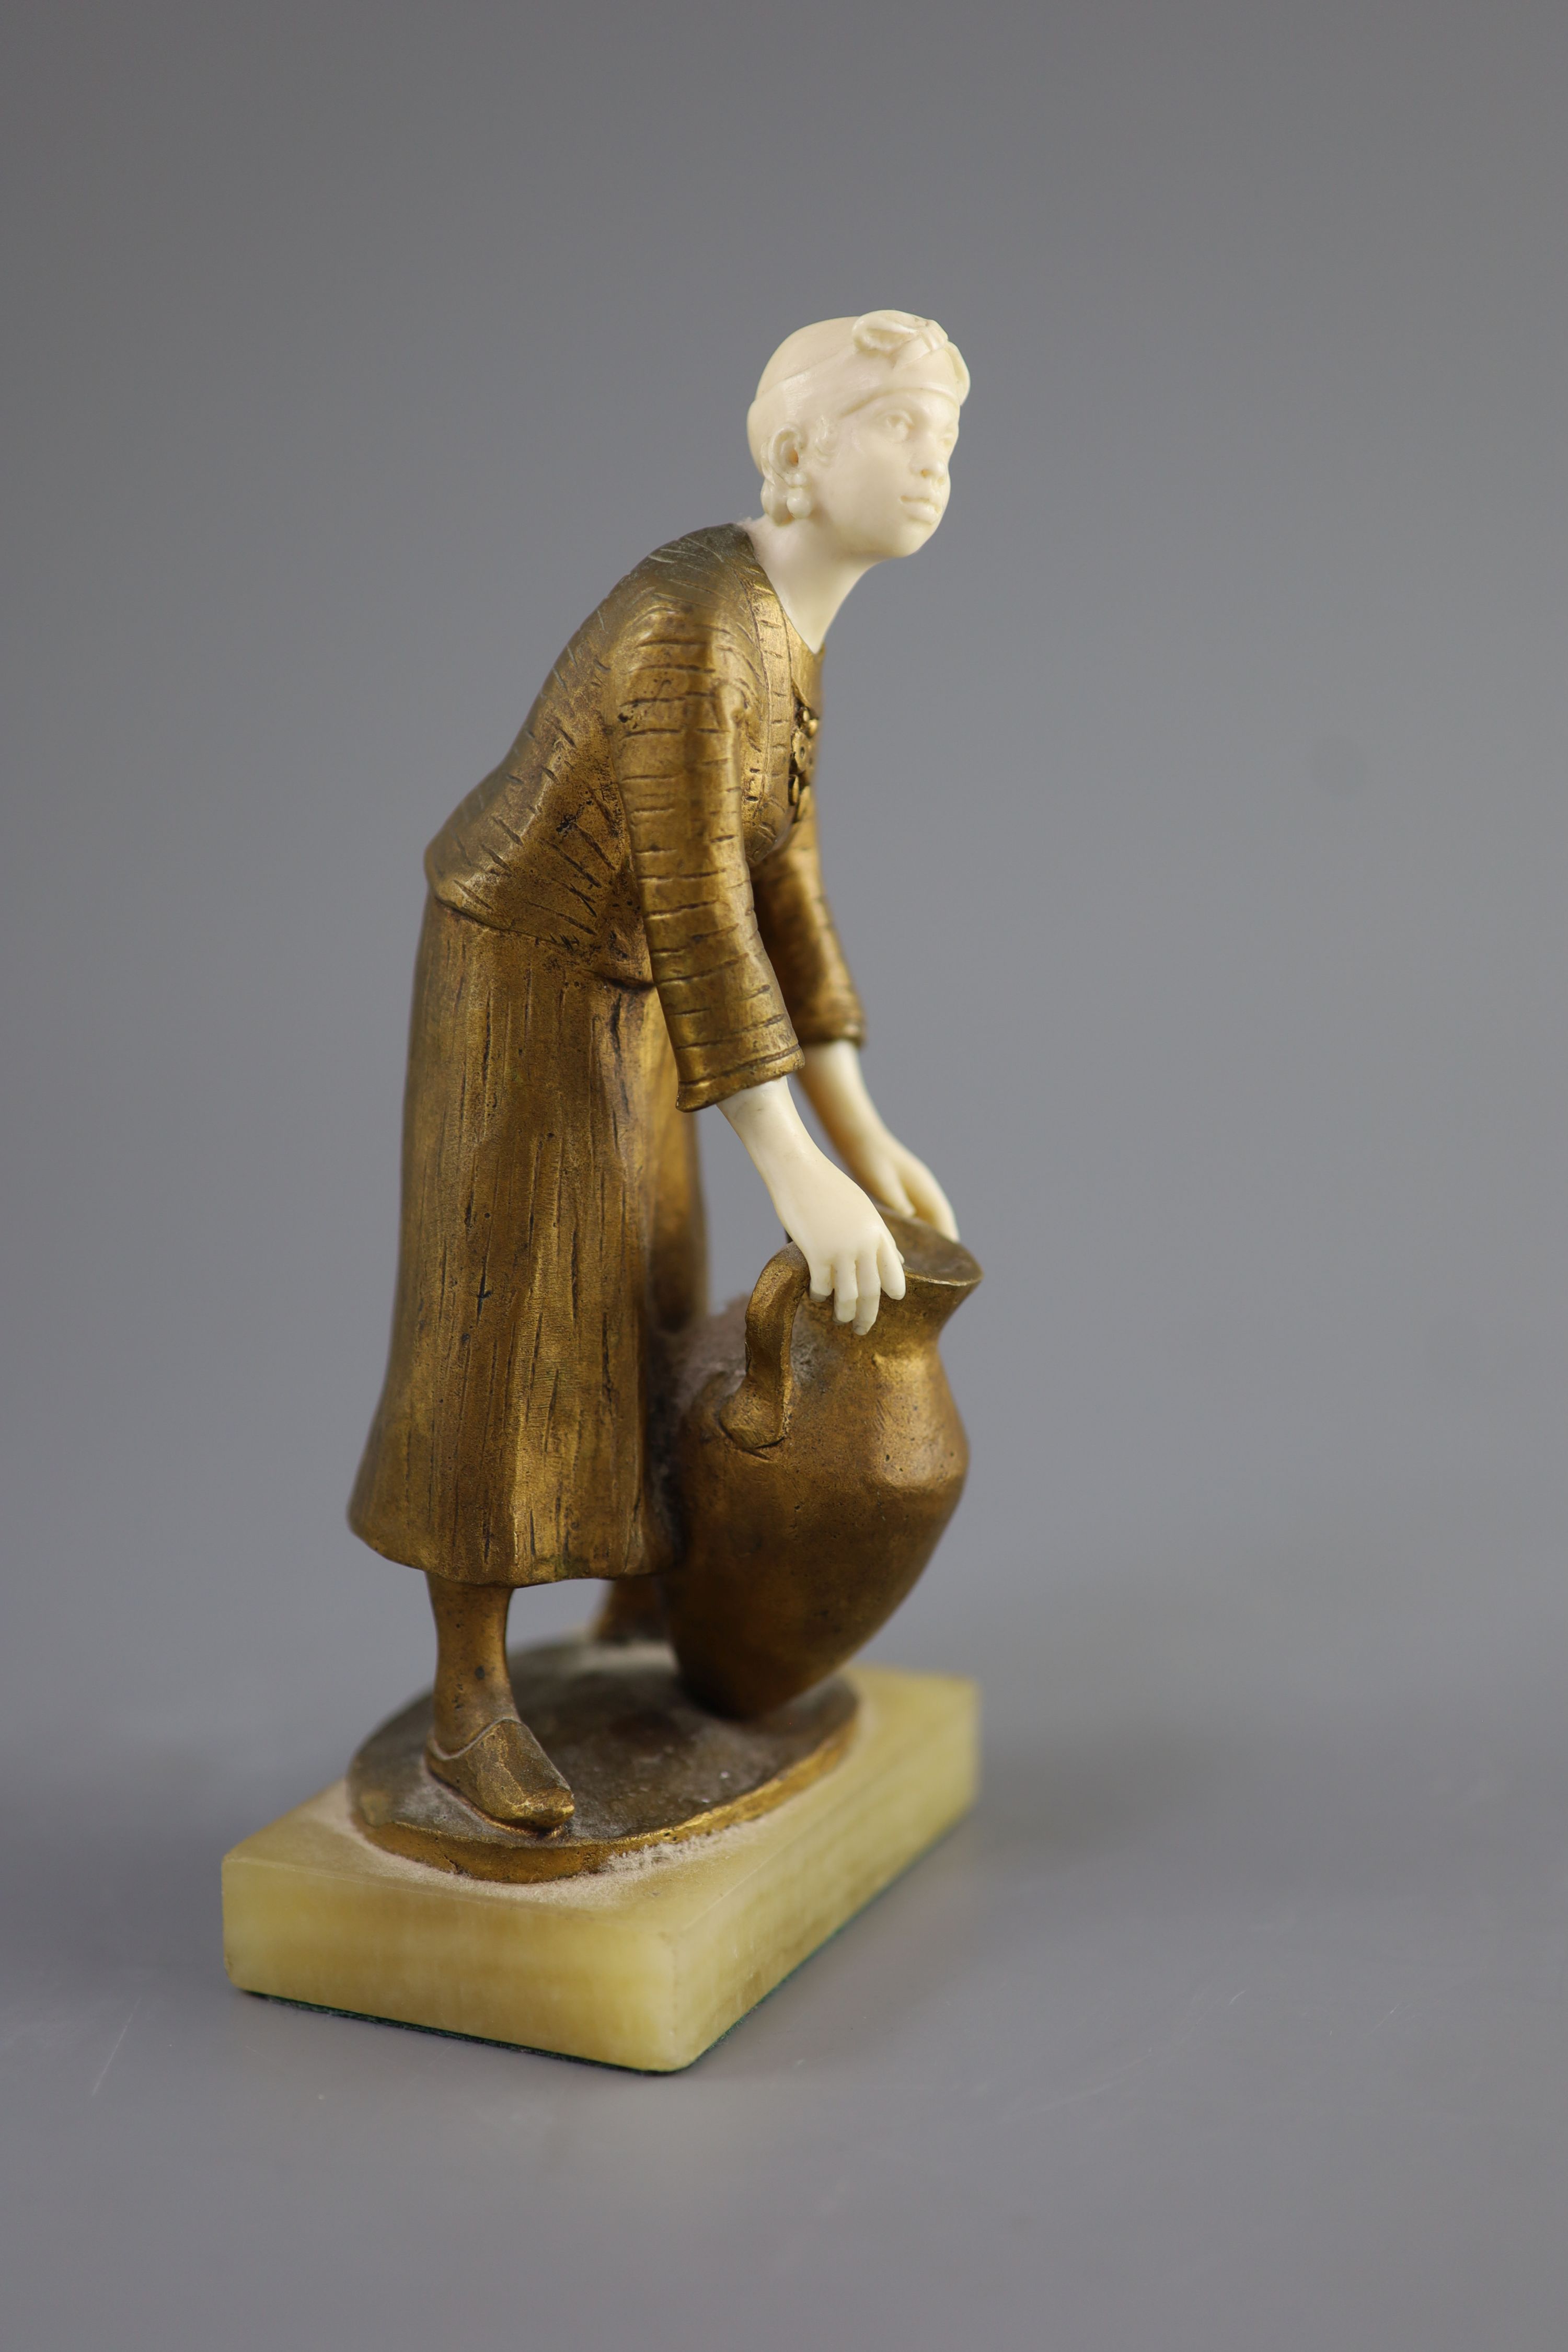 Hélène Maynard White (American, b.1870). A bronze and ivory study of an African girl with amphora base, c1920, 19cm high